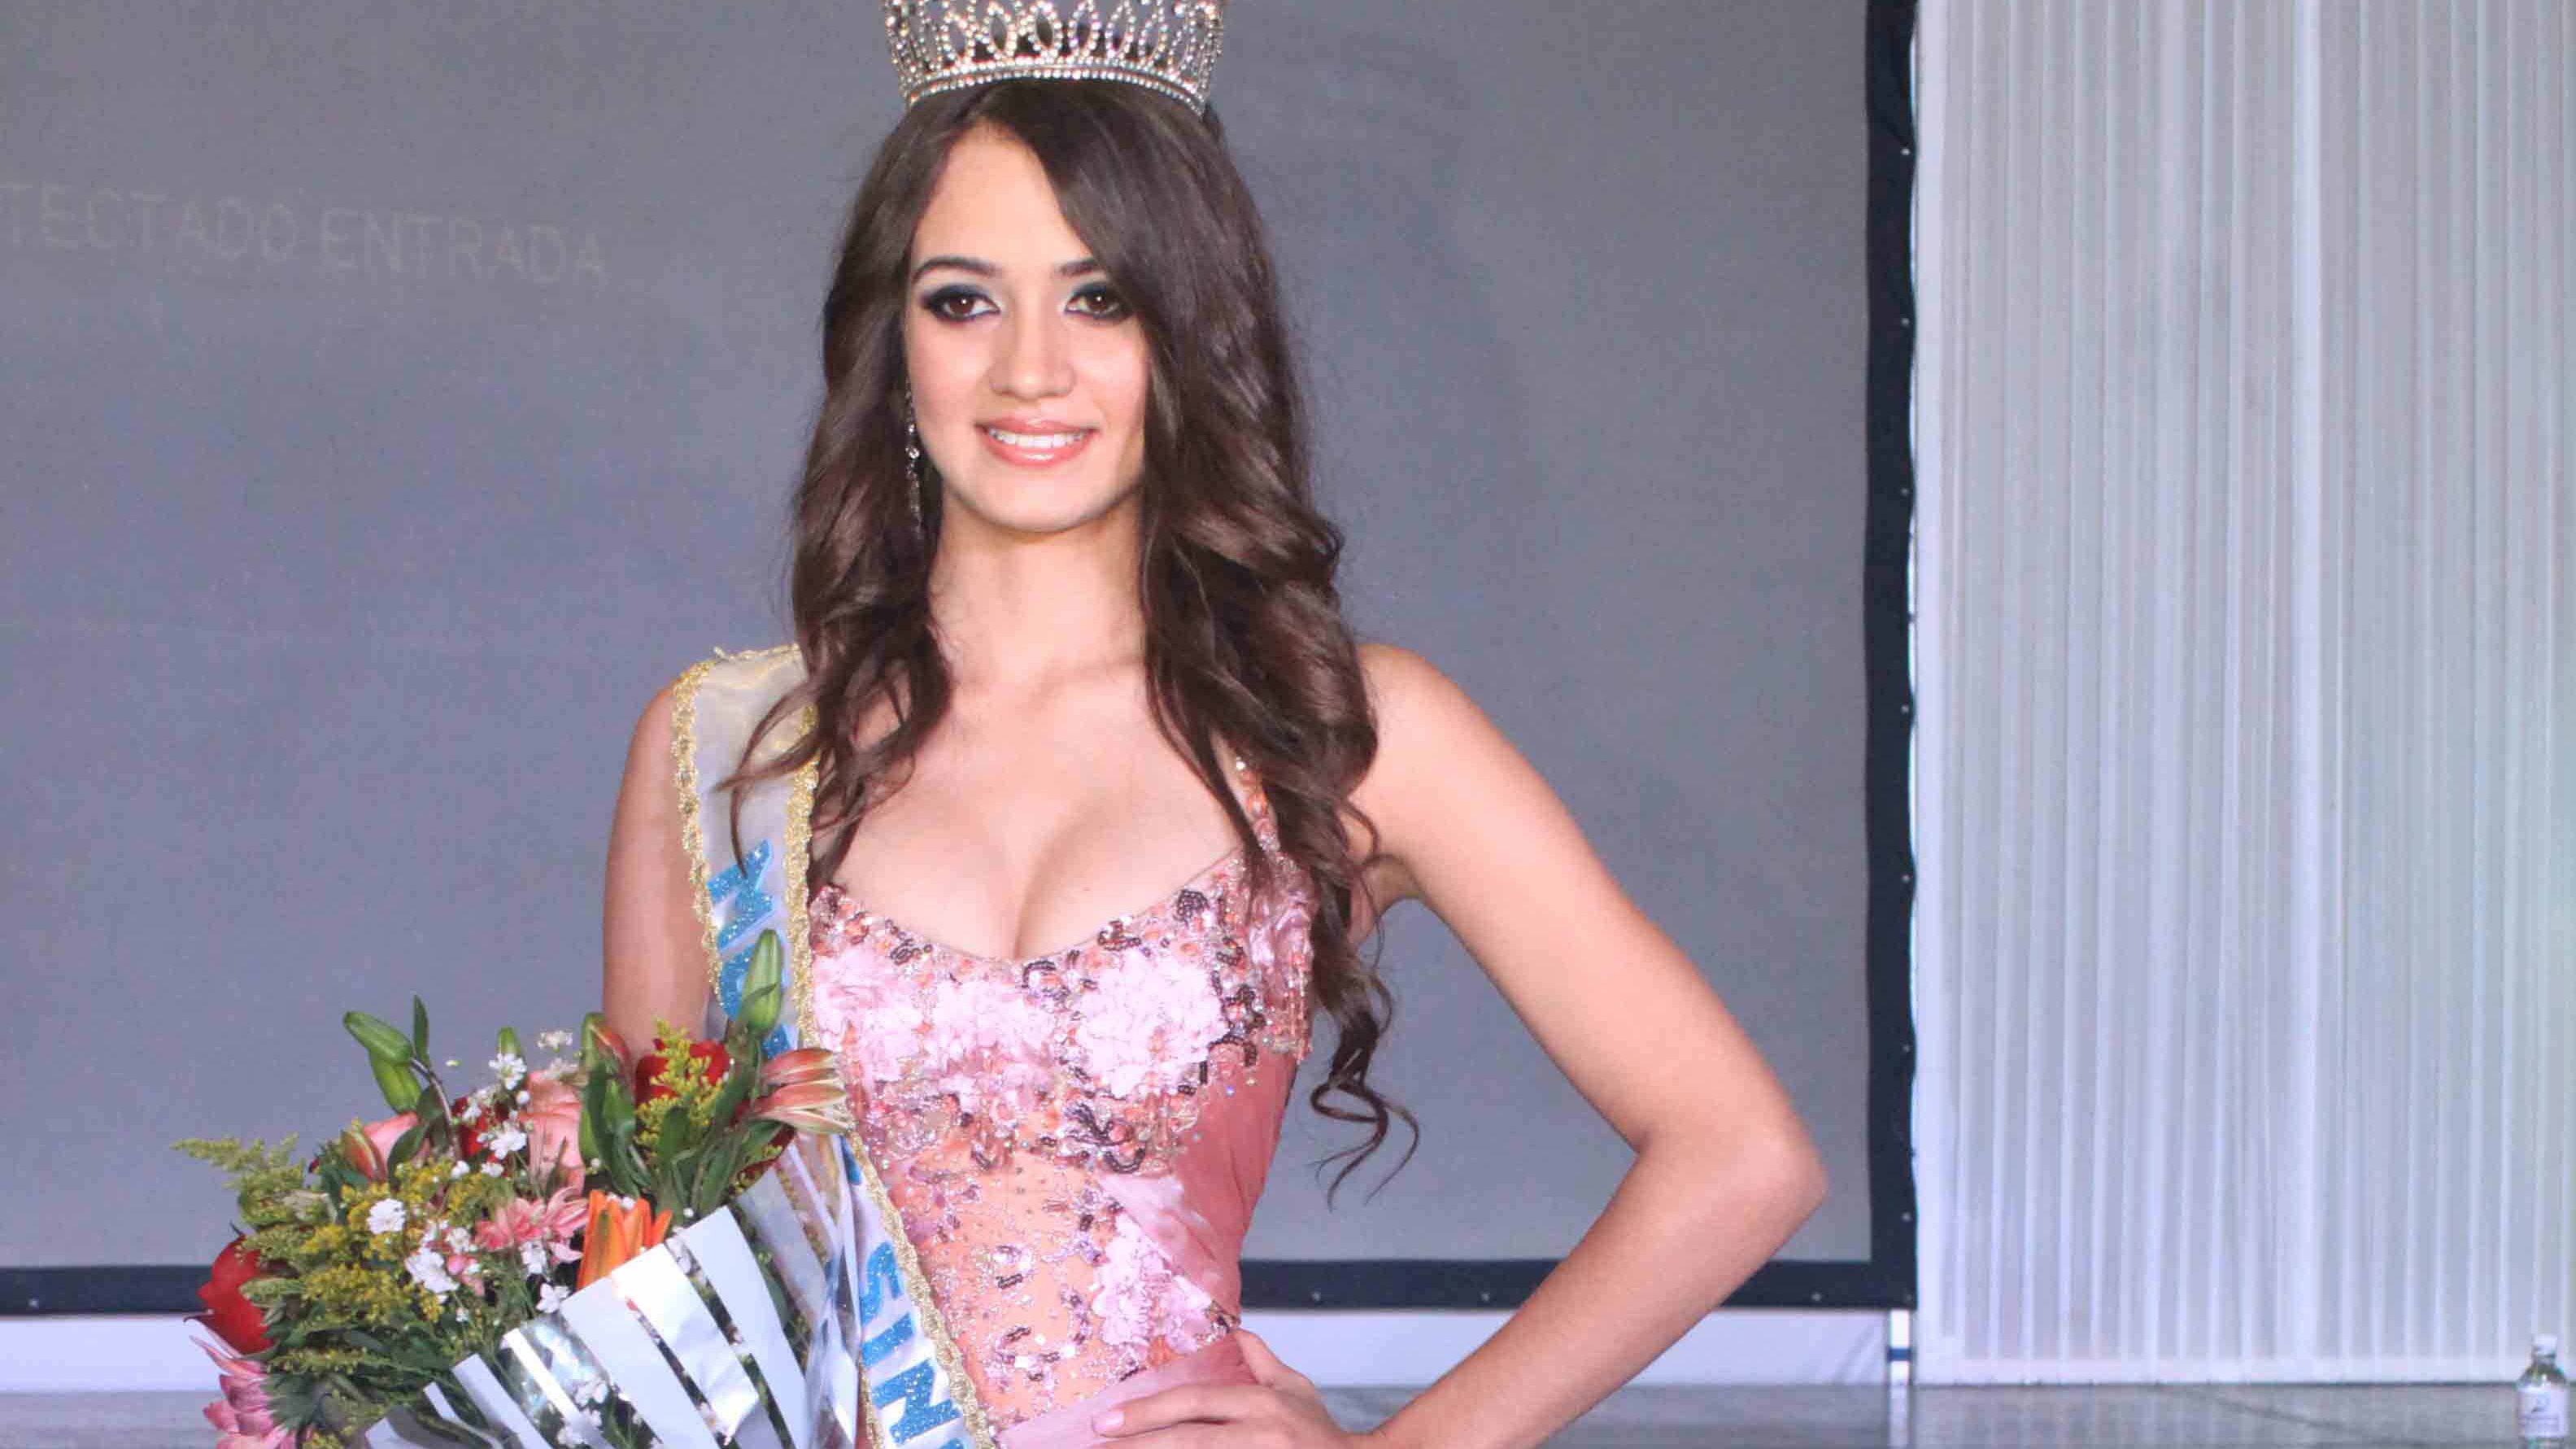 Mexican beauty queen Maria Susana Flores Gamez, 20, was killed during a weekend shootout in the state of Sinaloa.